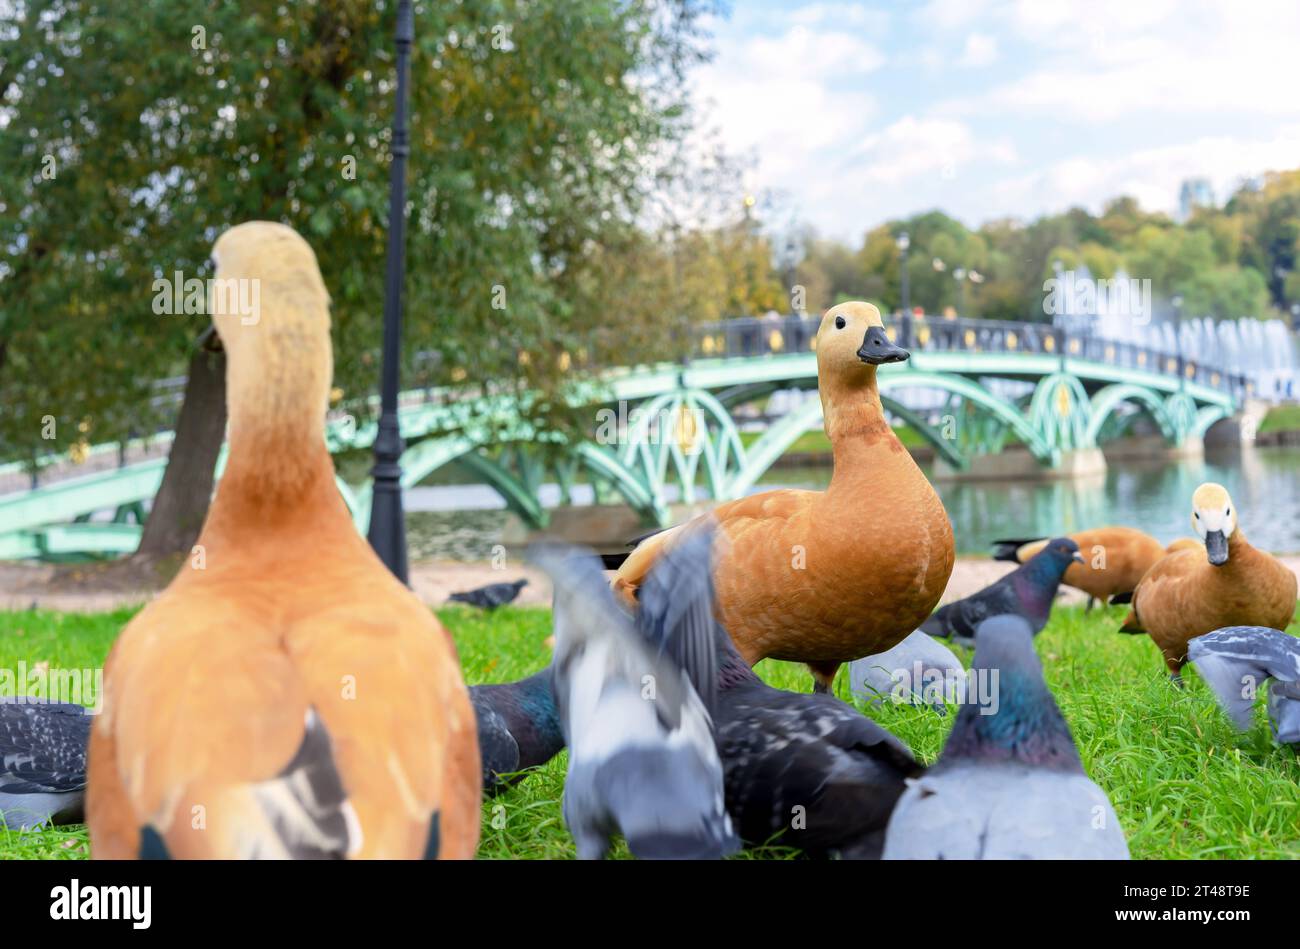 Red ducks or Ogar ducks and pigeons on the river bank with a beautiful bridge. Stock Photo